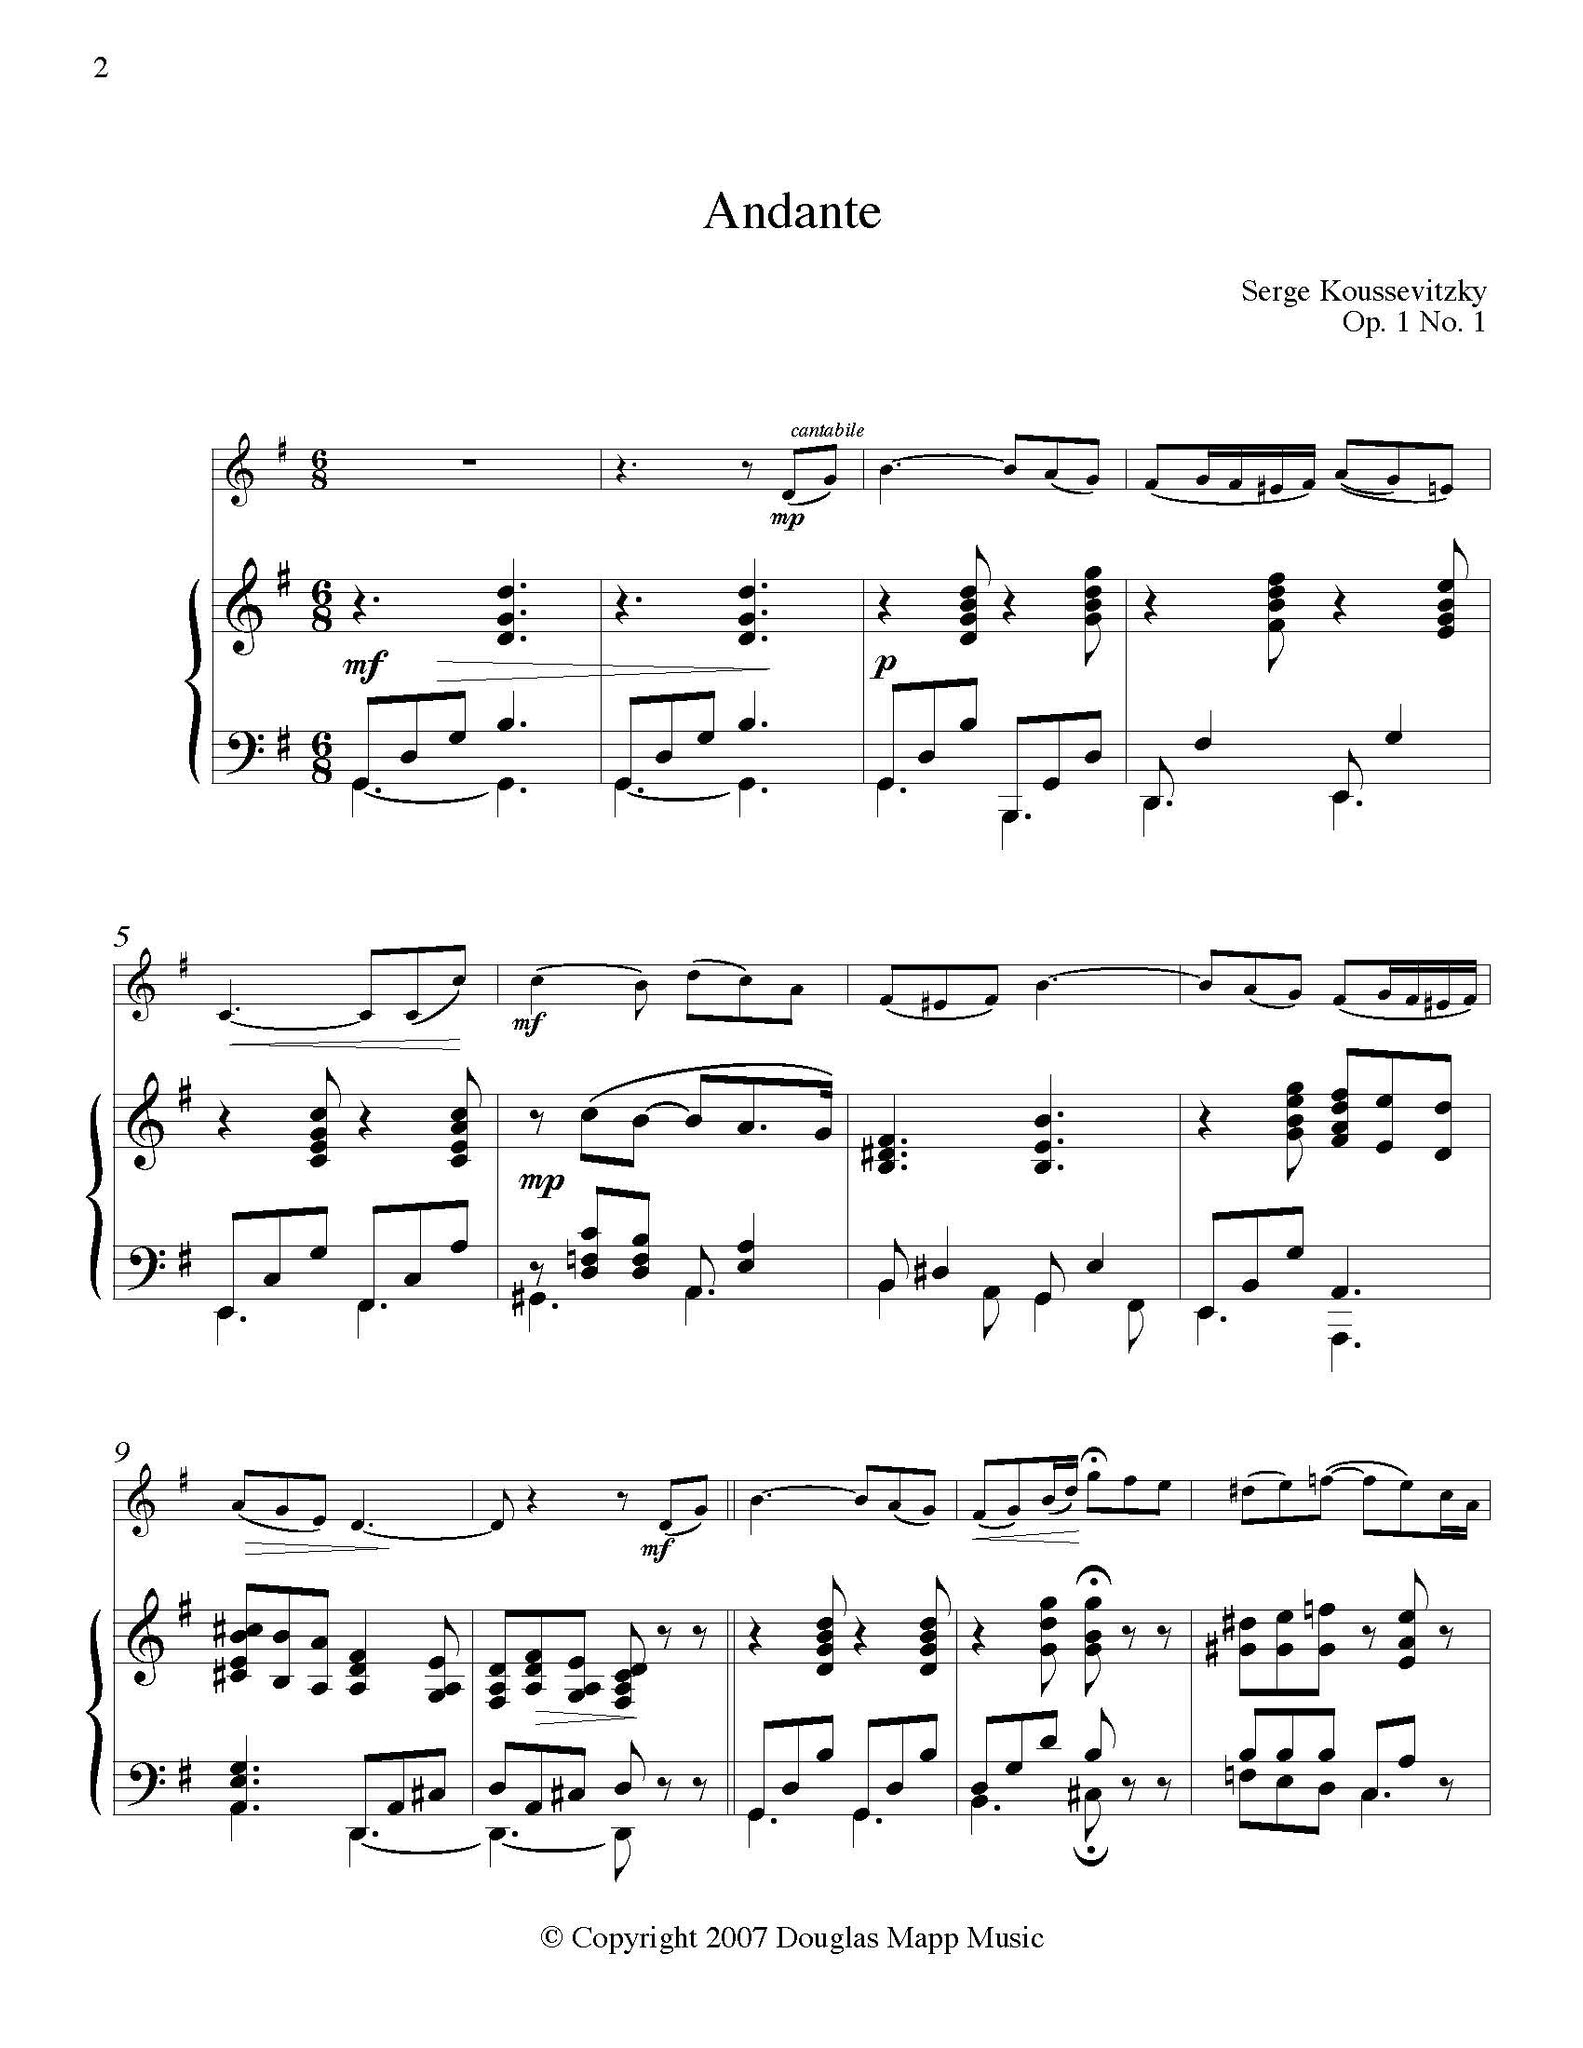 Koussevitzky Andante orchestra tuning page 1